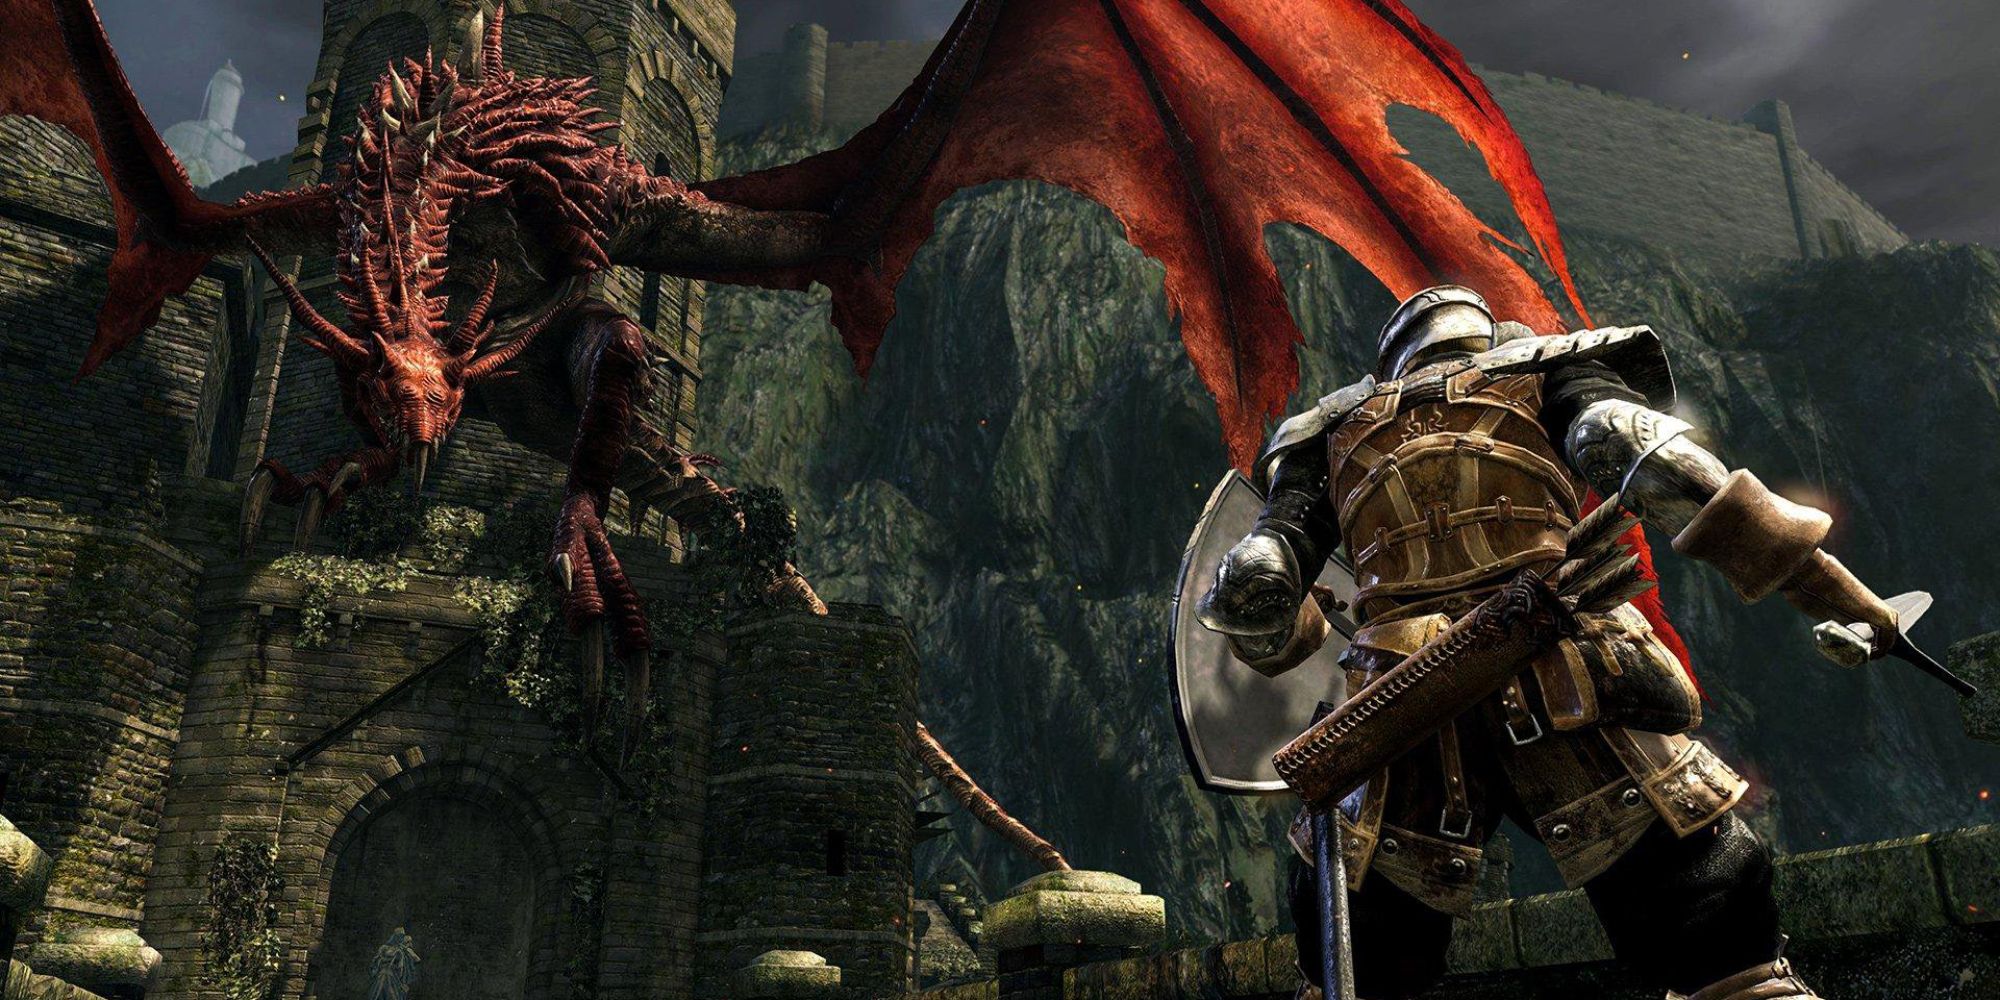 A Dark Souls player facing a red dragon